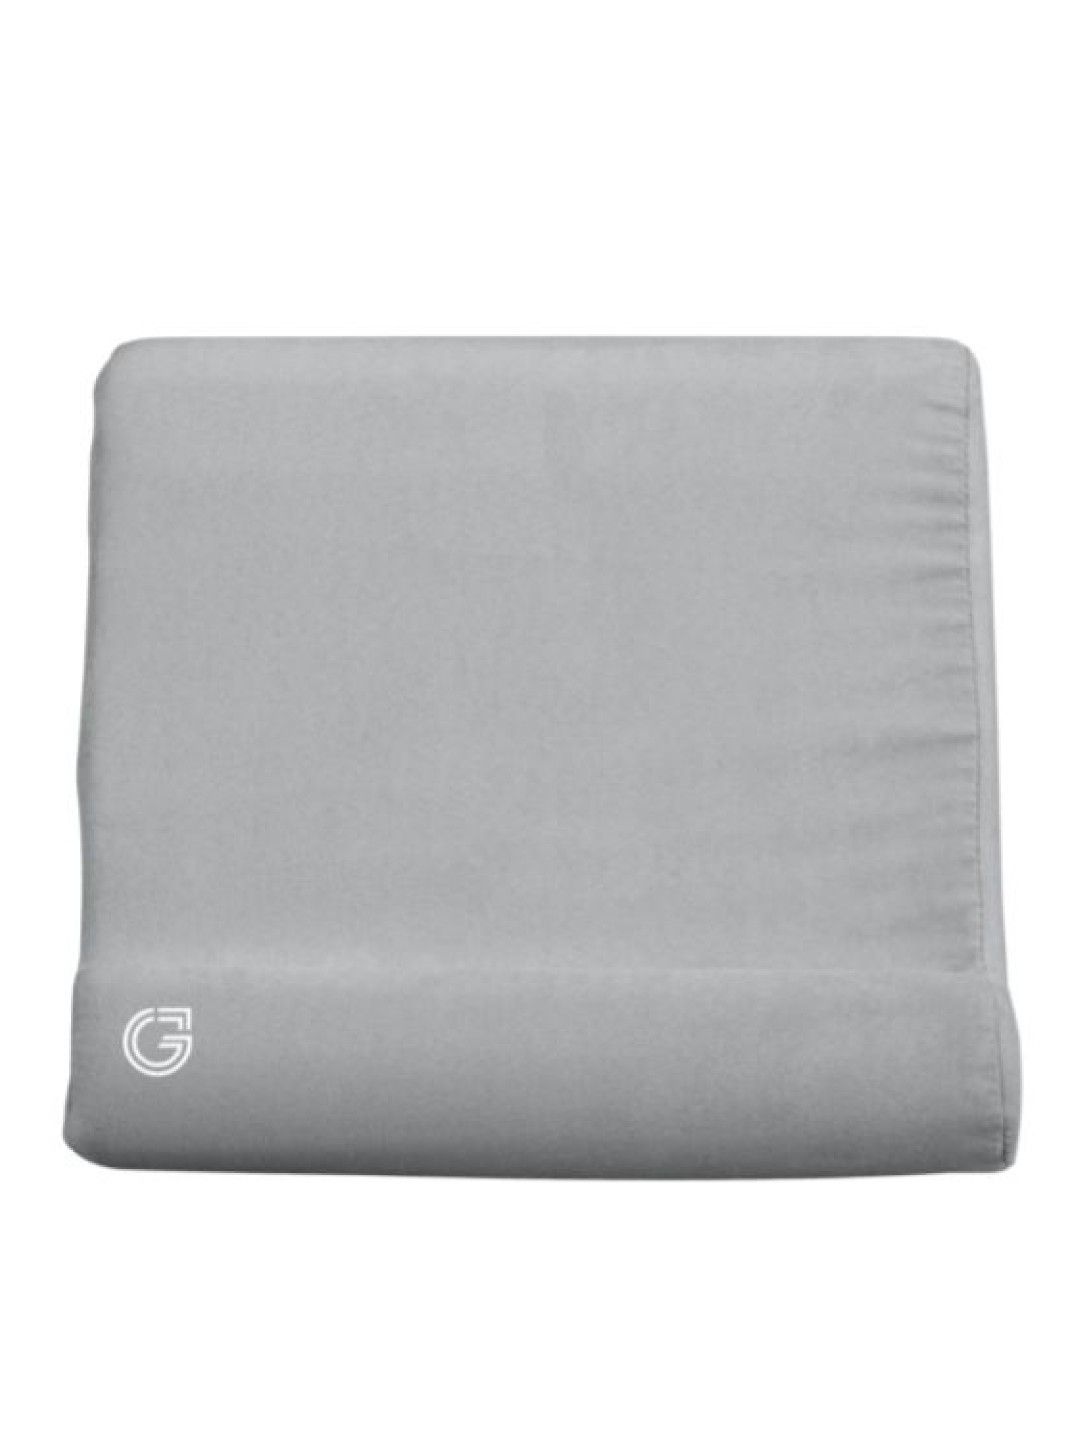 Sunbeams Lifestyle Gray Label Premium Tablet Pillow Stand (No Color- Image 2)